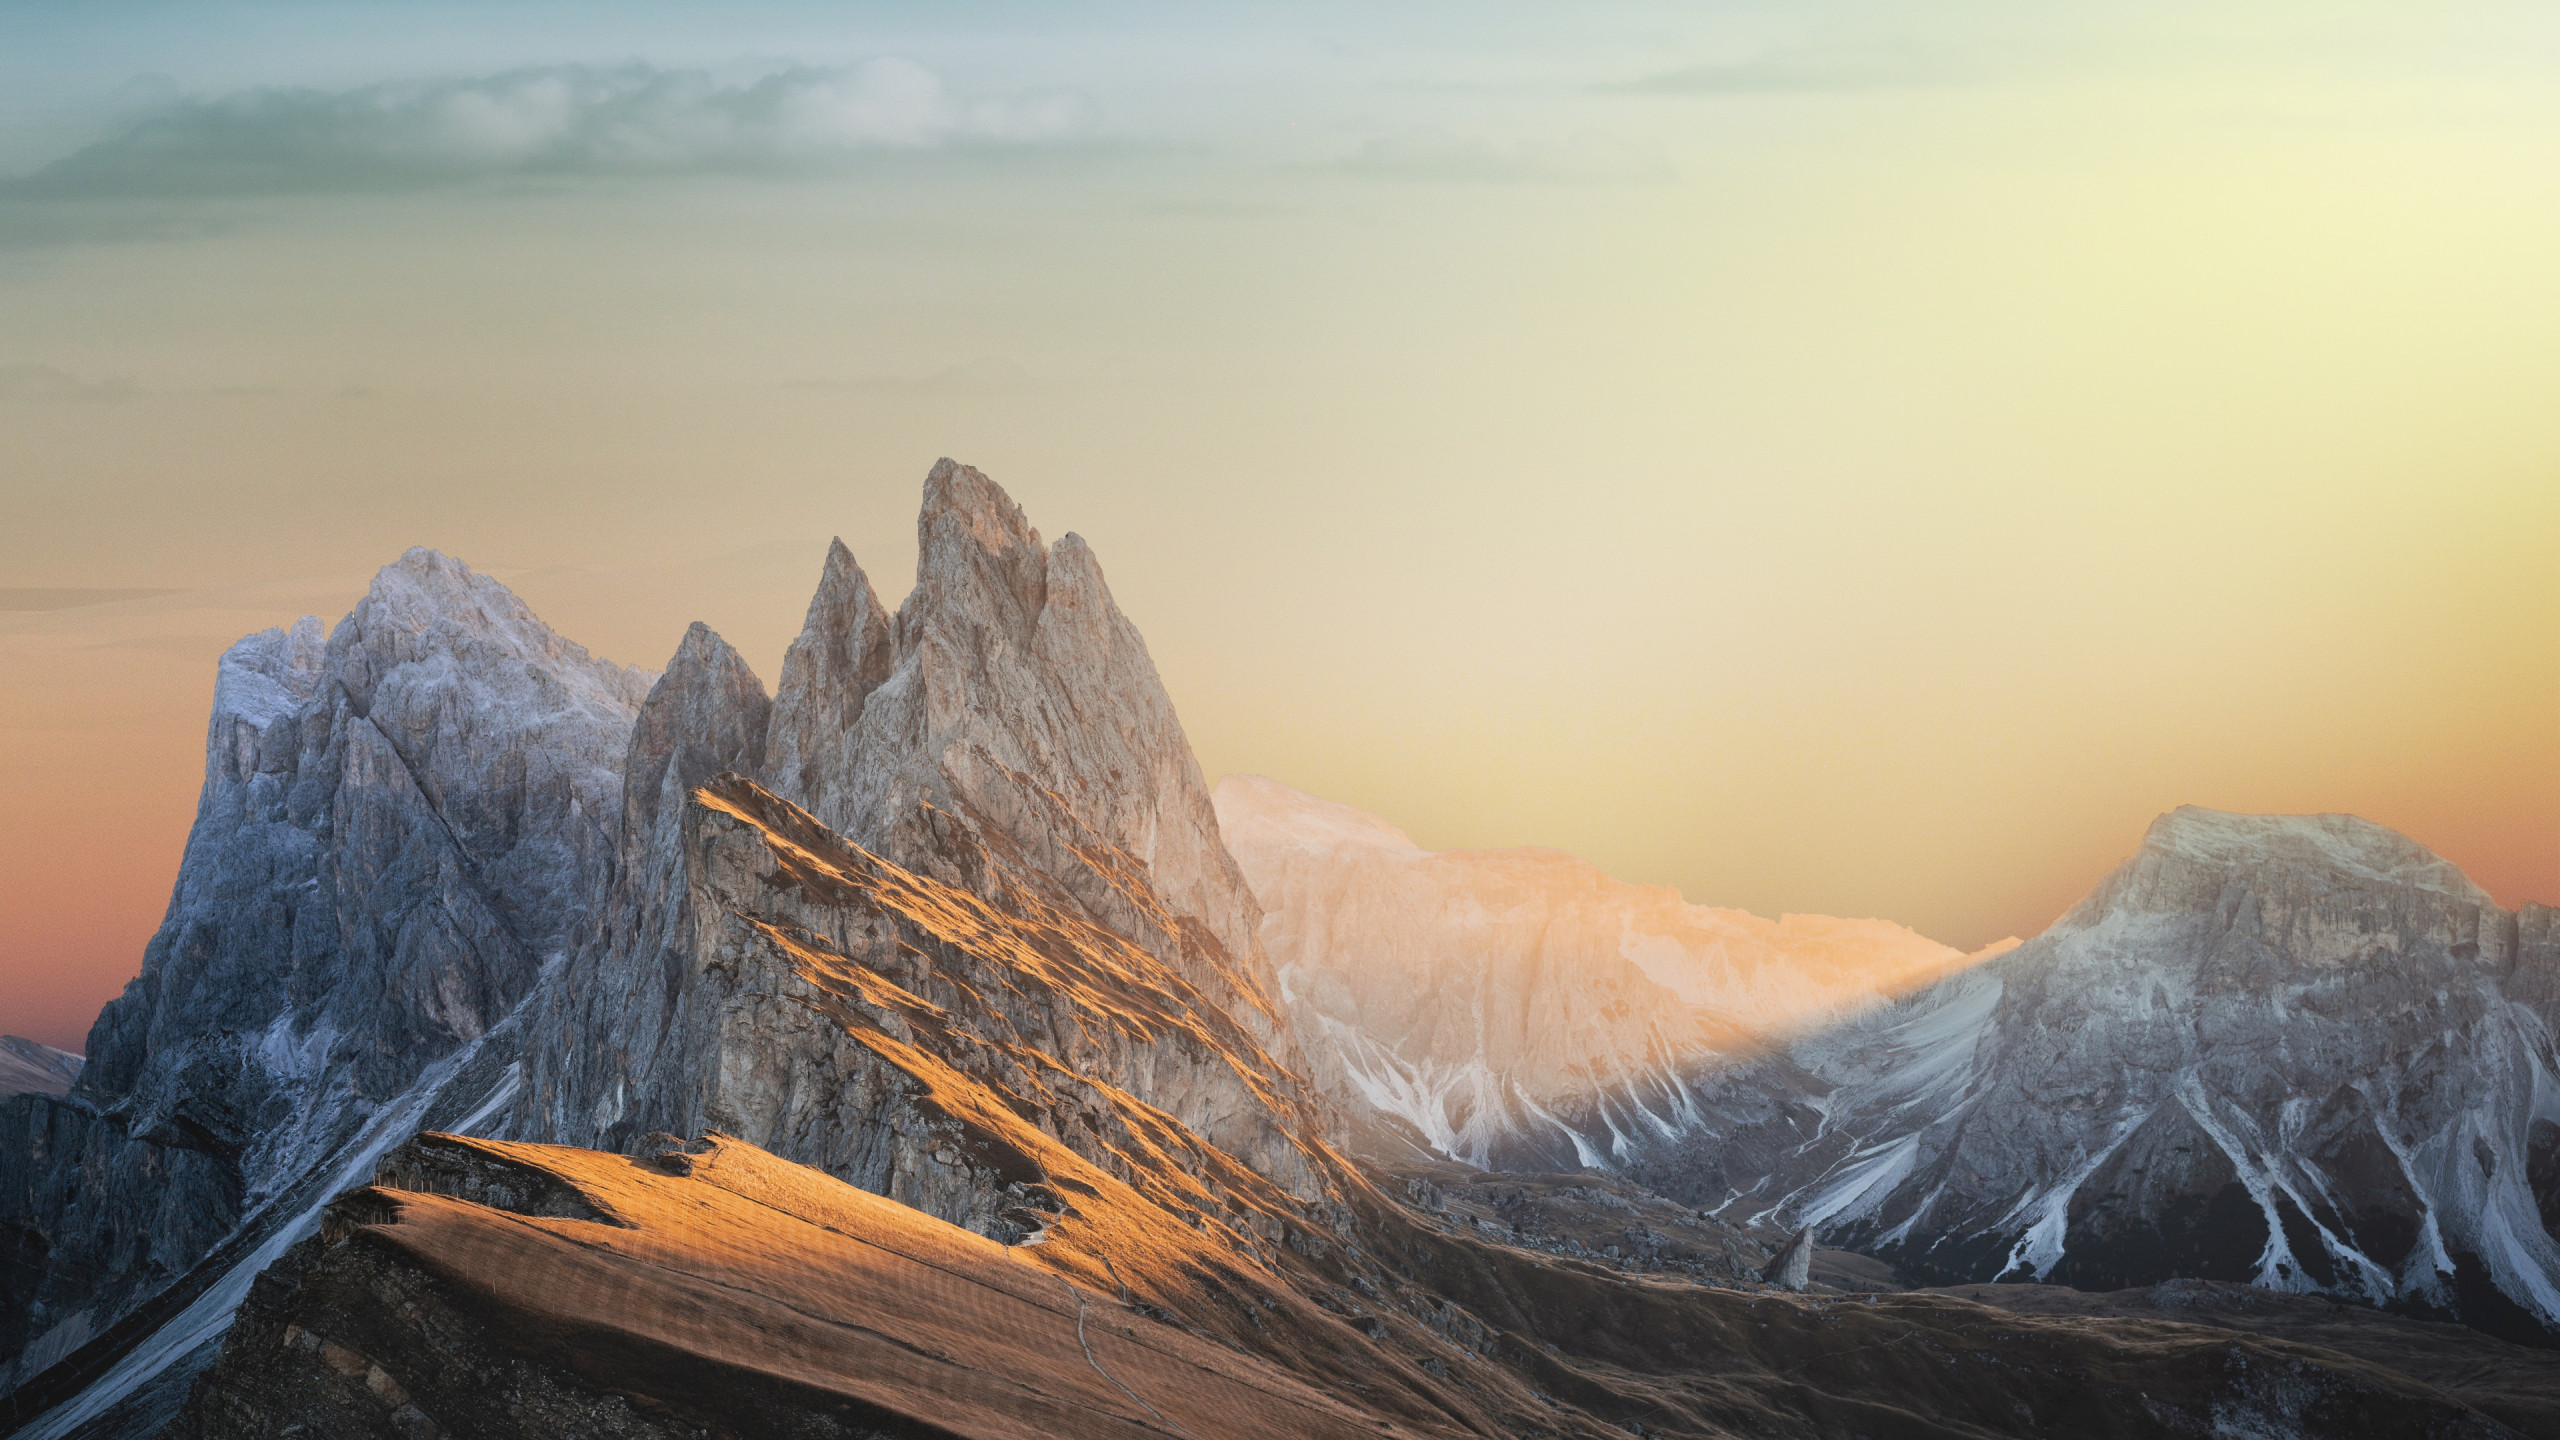 Keep calm and admire the mountain view wallpaper 2560x1440